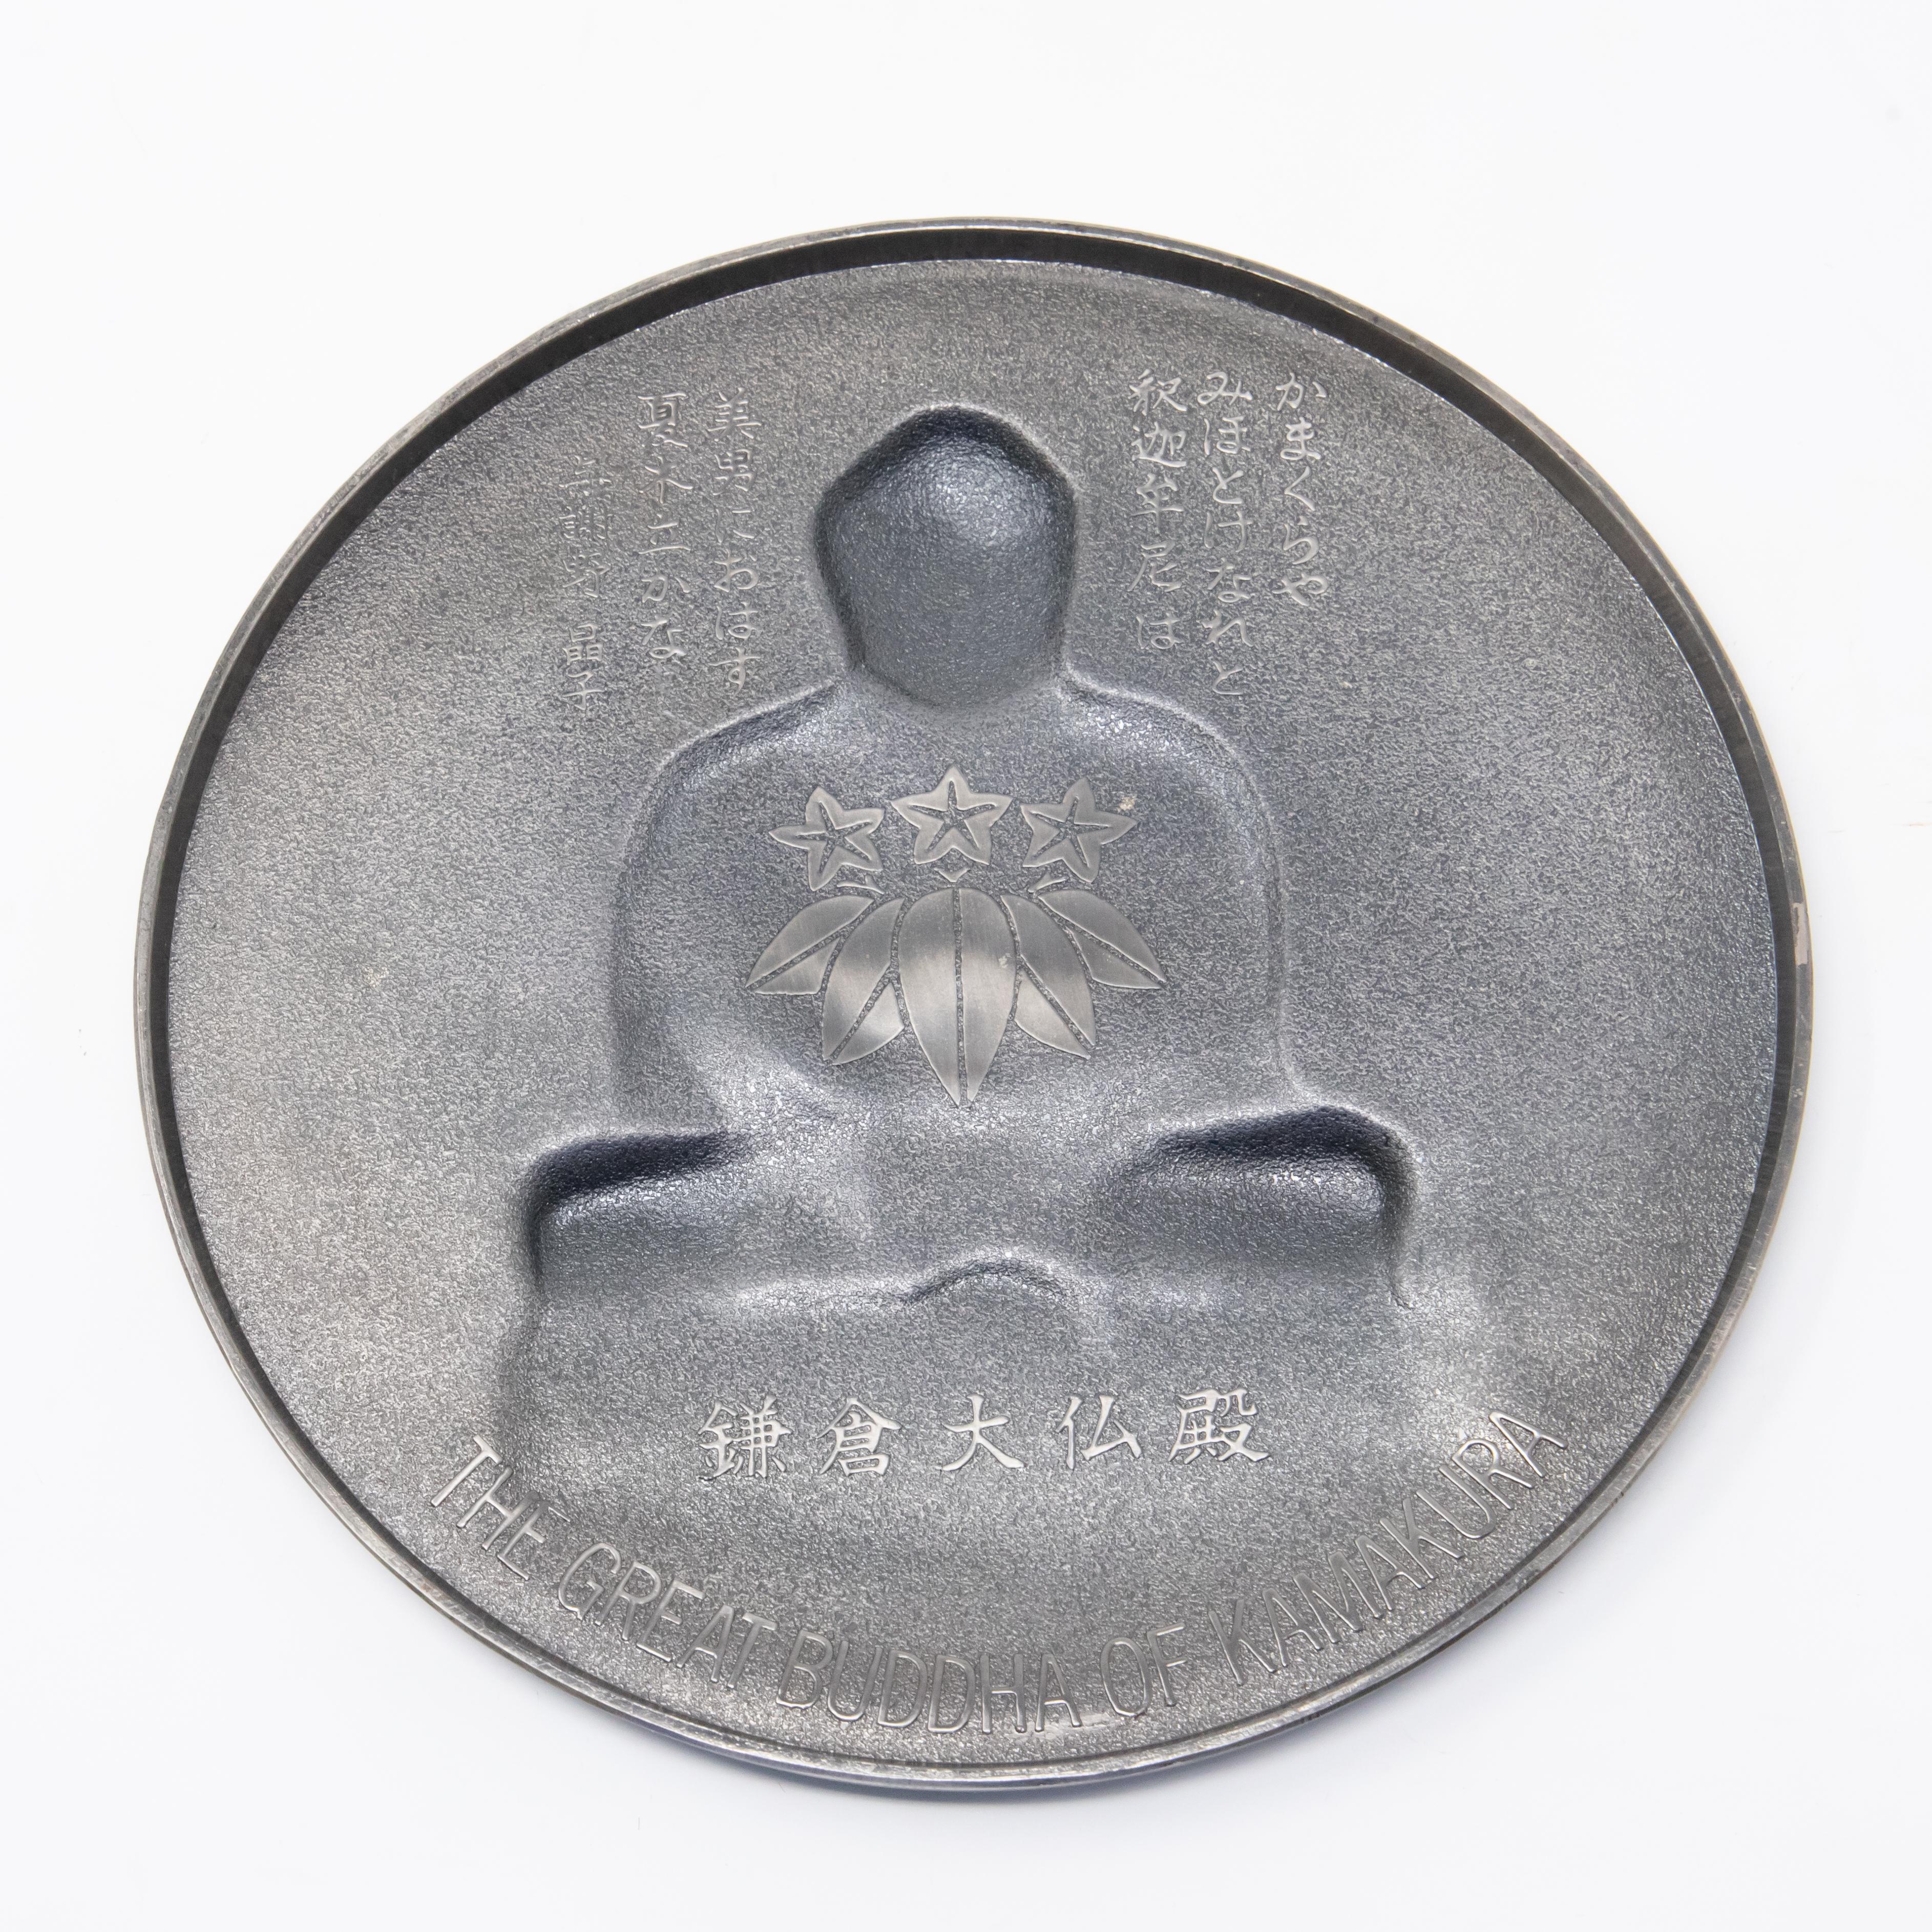 Beautiful metalwork on this pewter Buddha wall plaque. On the back it has all the markings and tells where the piece originated and where it finished. Also tells dates of progress.